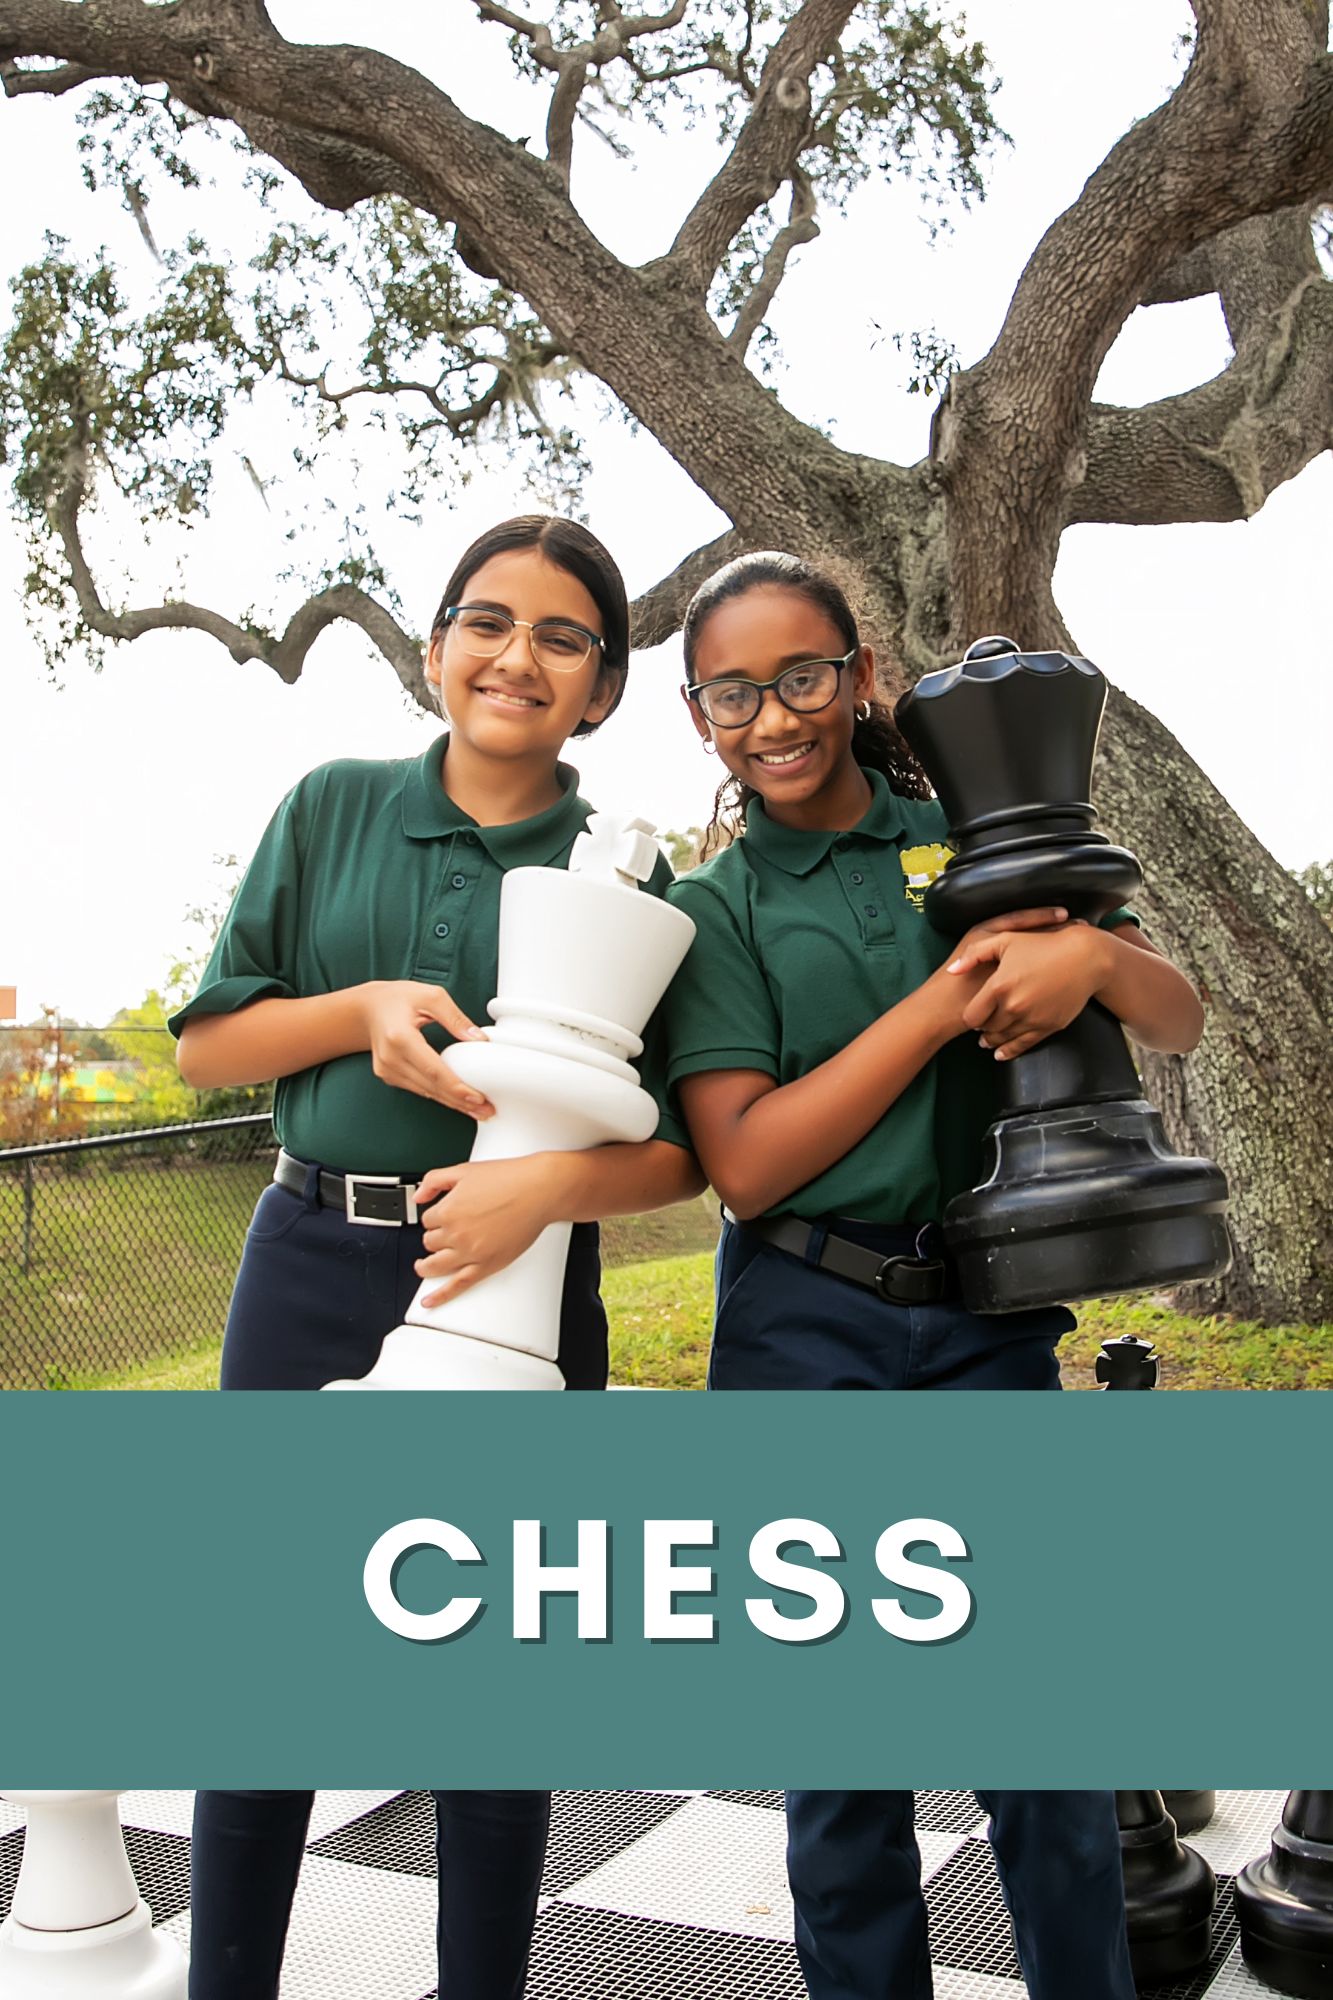 GIRLS WITH CHESS BOARD